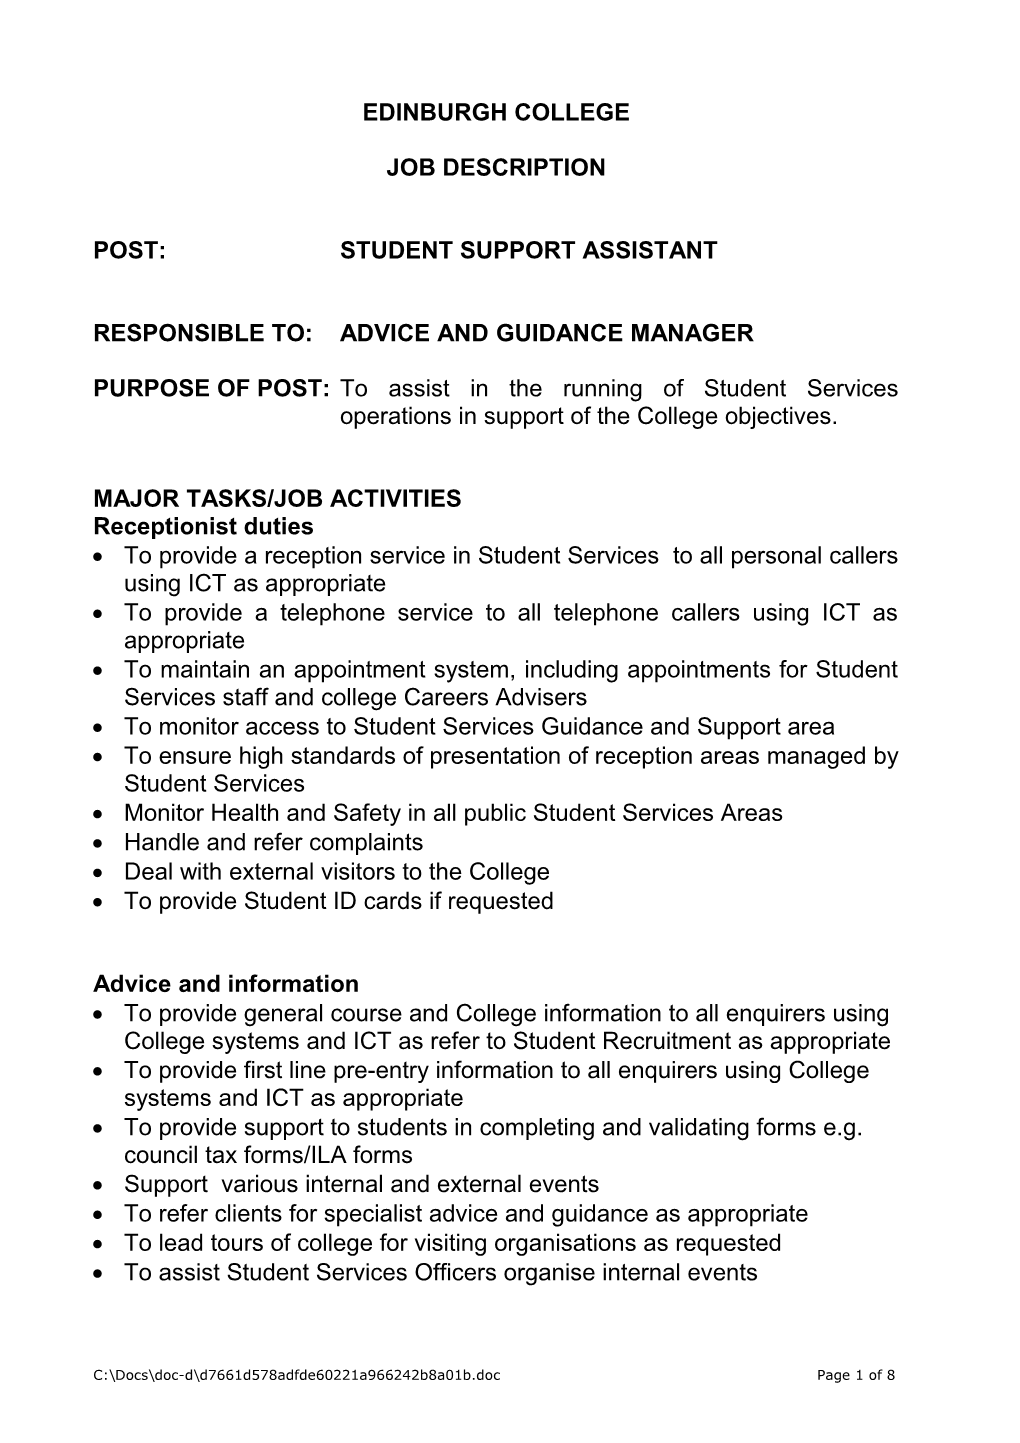 Operations Team Leader - Student Services